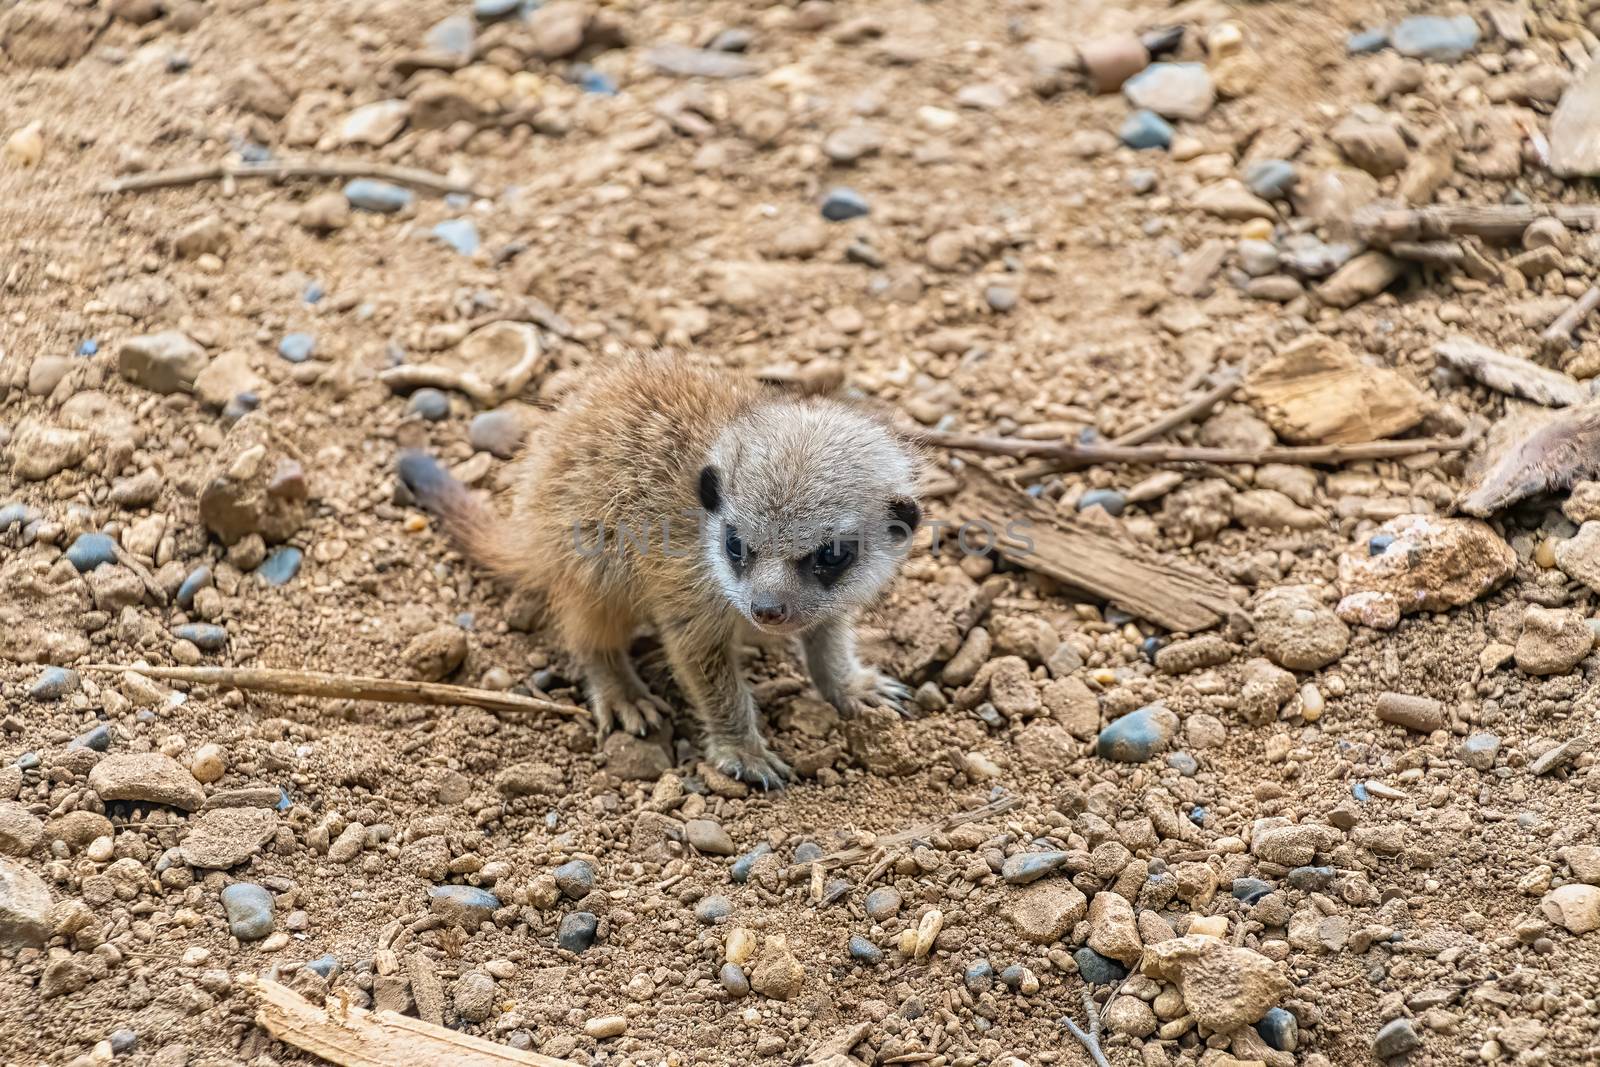 A single baby meerkat pup investigating the area